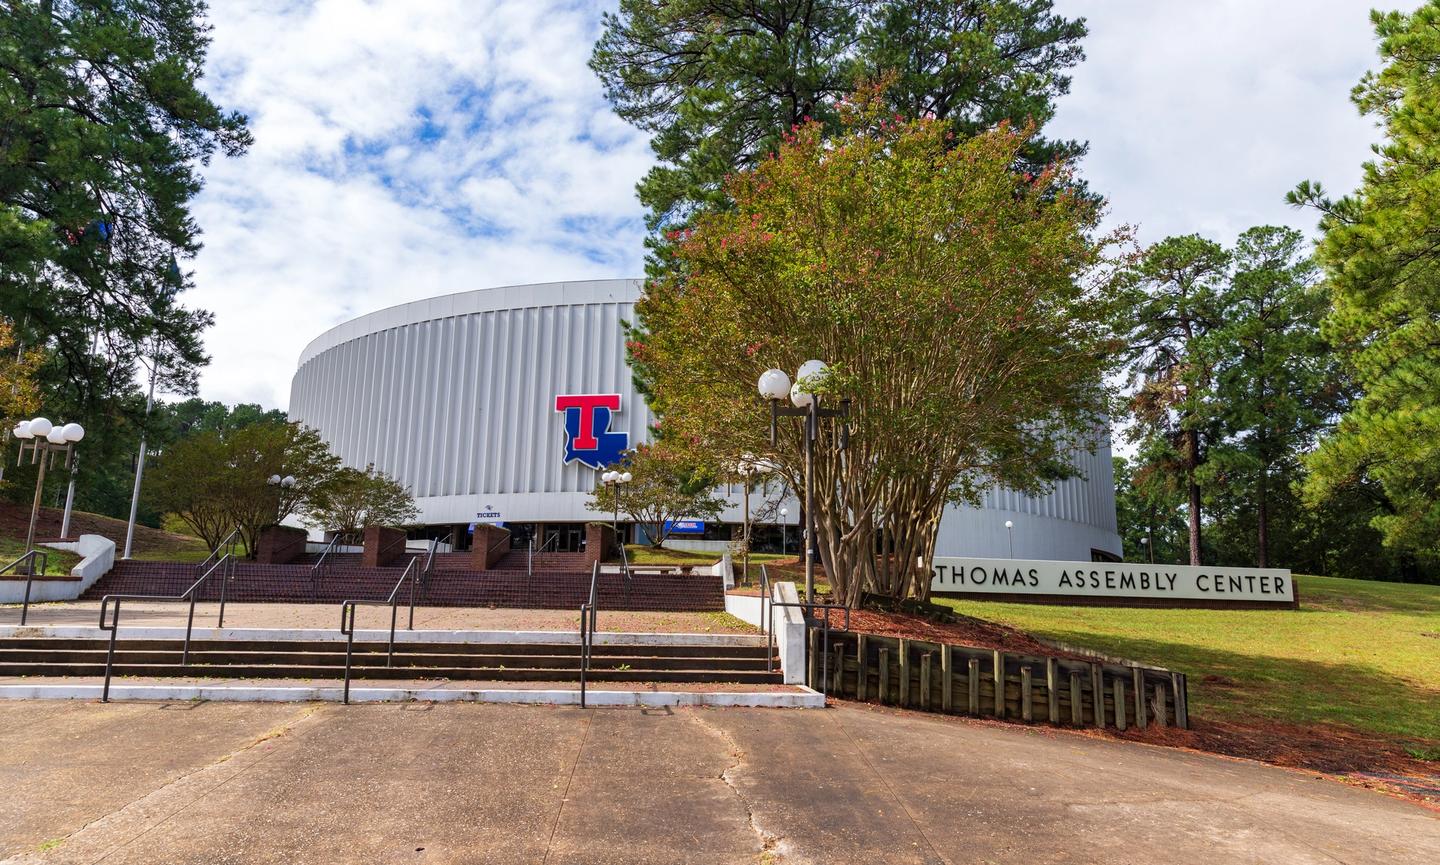 Thomas Assembly Center on the Louisiana Tech campus hosts sporting events, concerts, and more.